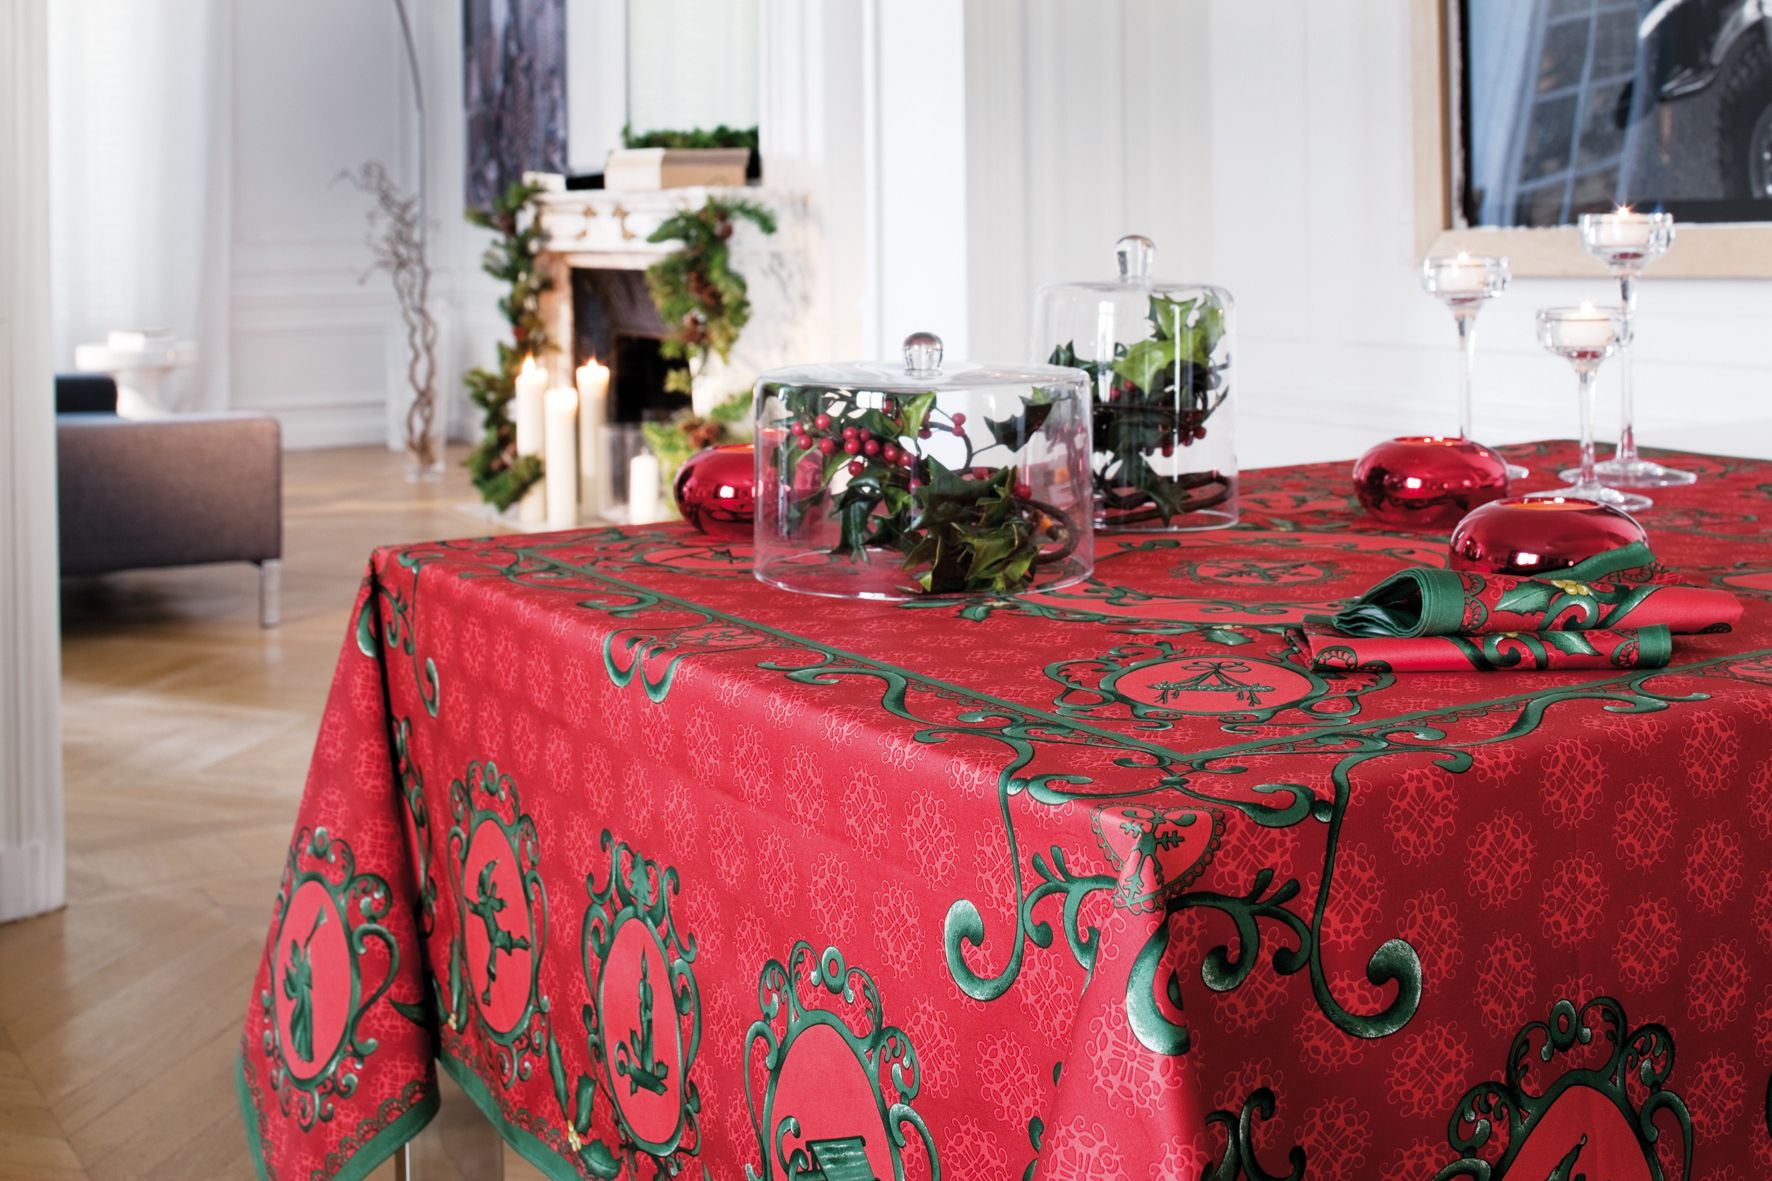 How Many Tablecloths Are On The Christmas Table In Provence? Why?